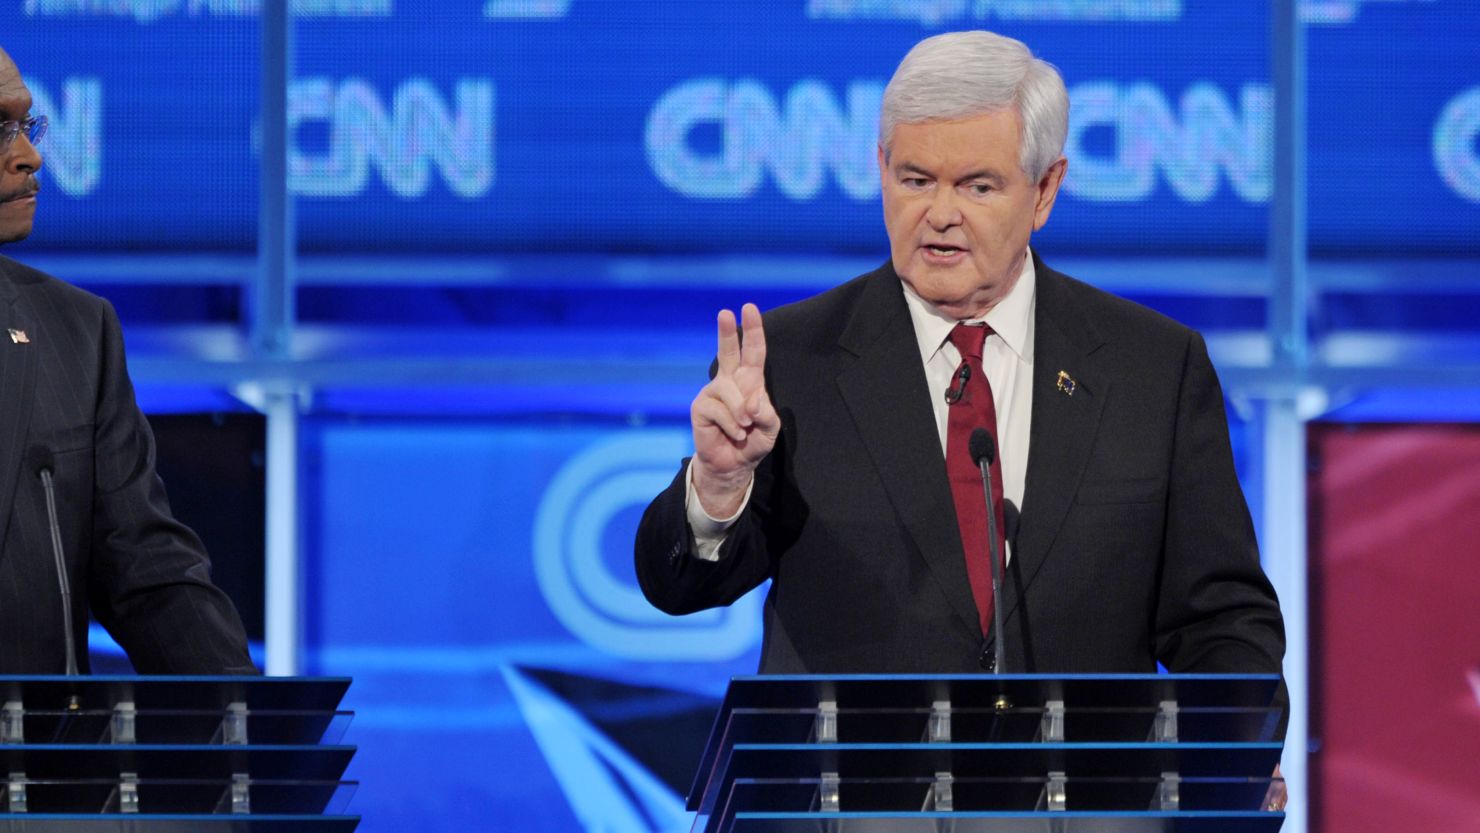 Newt Gingrich injected a note of reason on immigration at Tuesday's debate, says Ruben Navarrette.